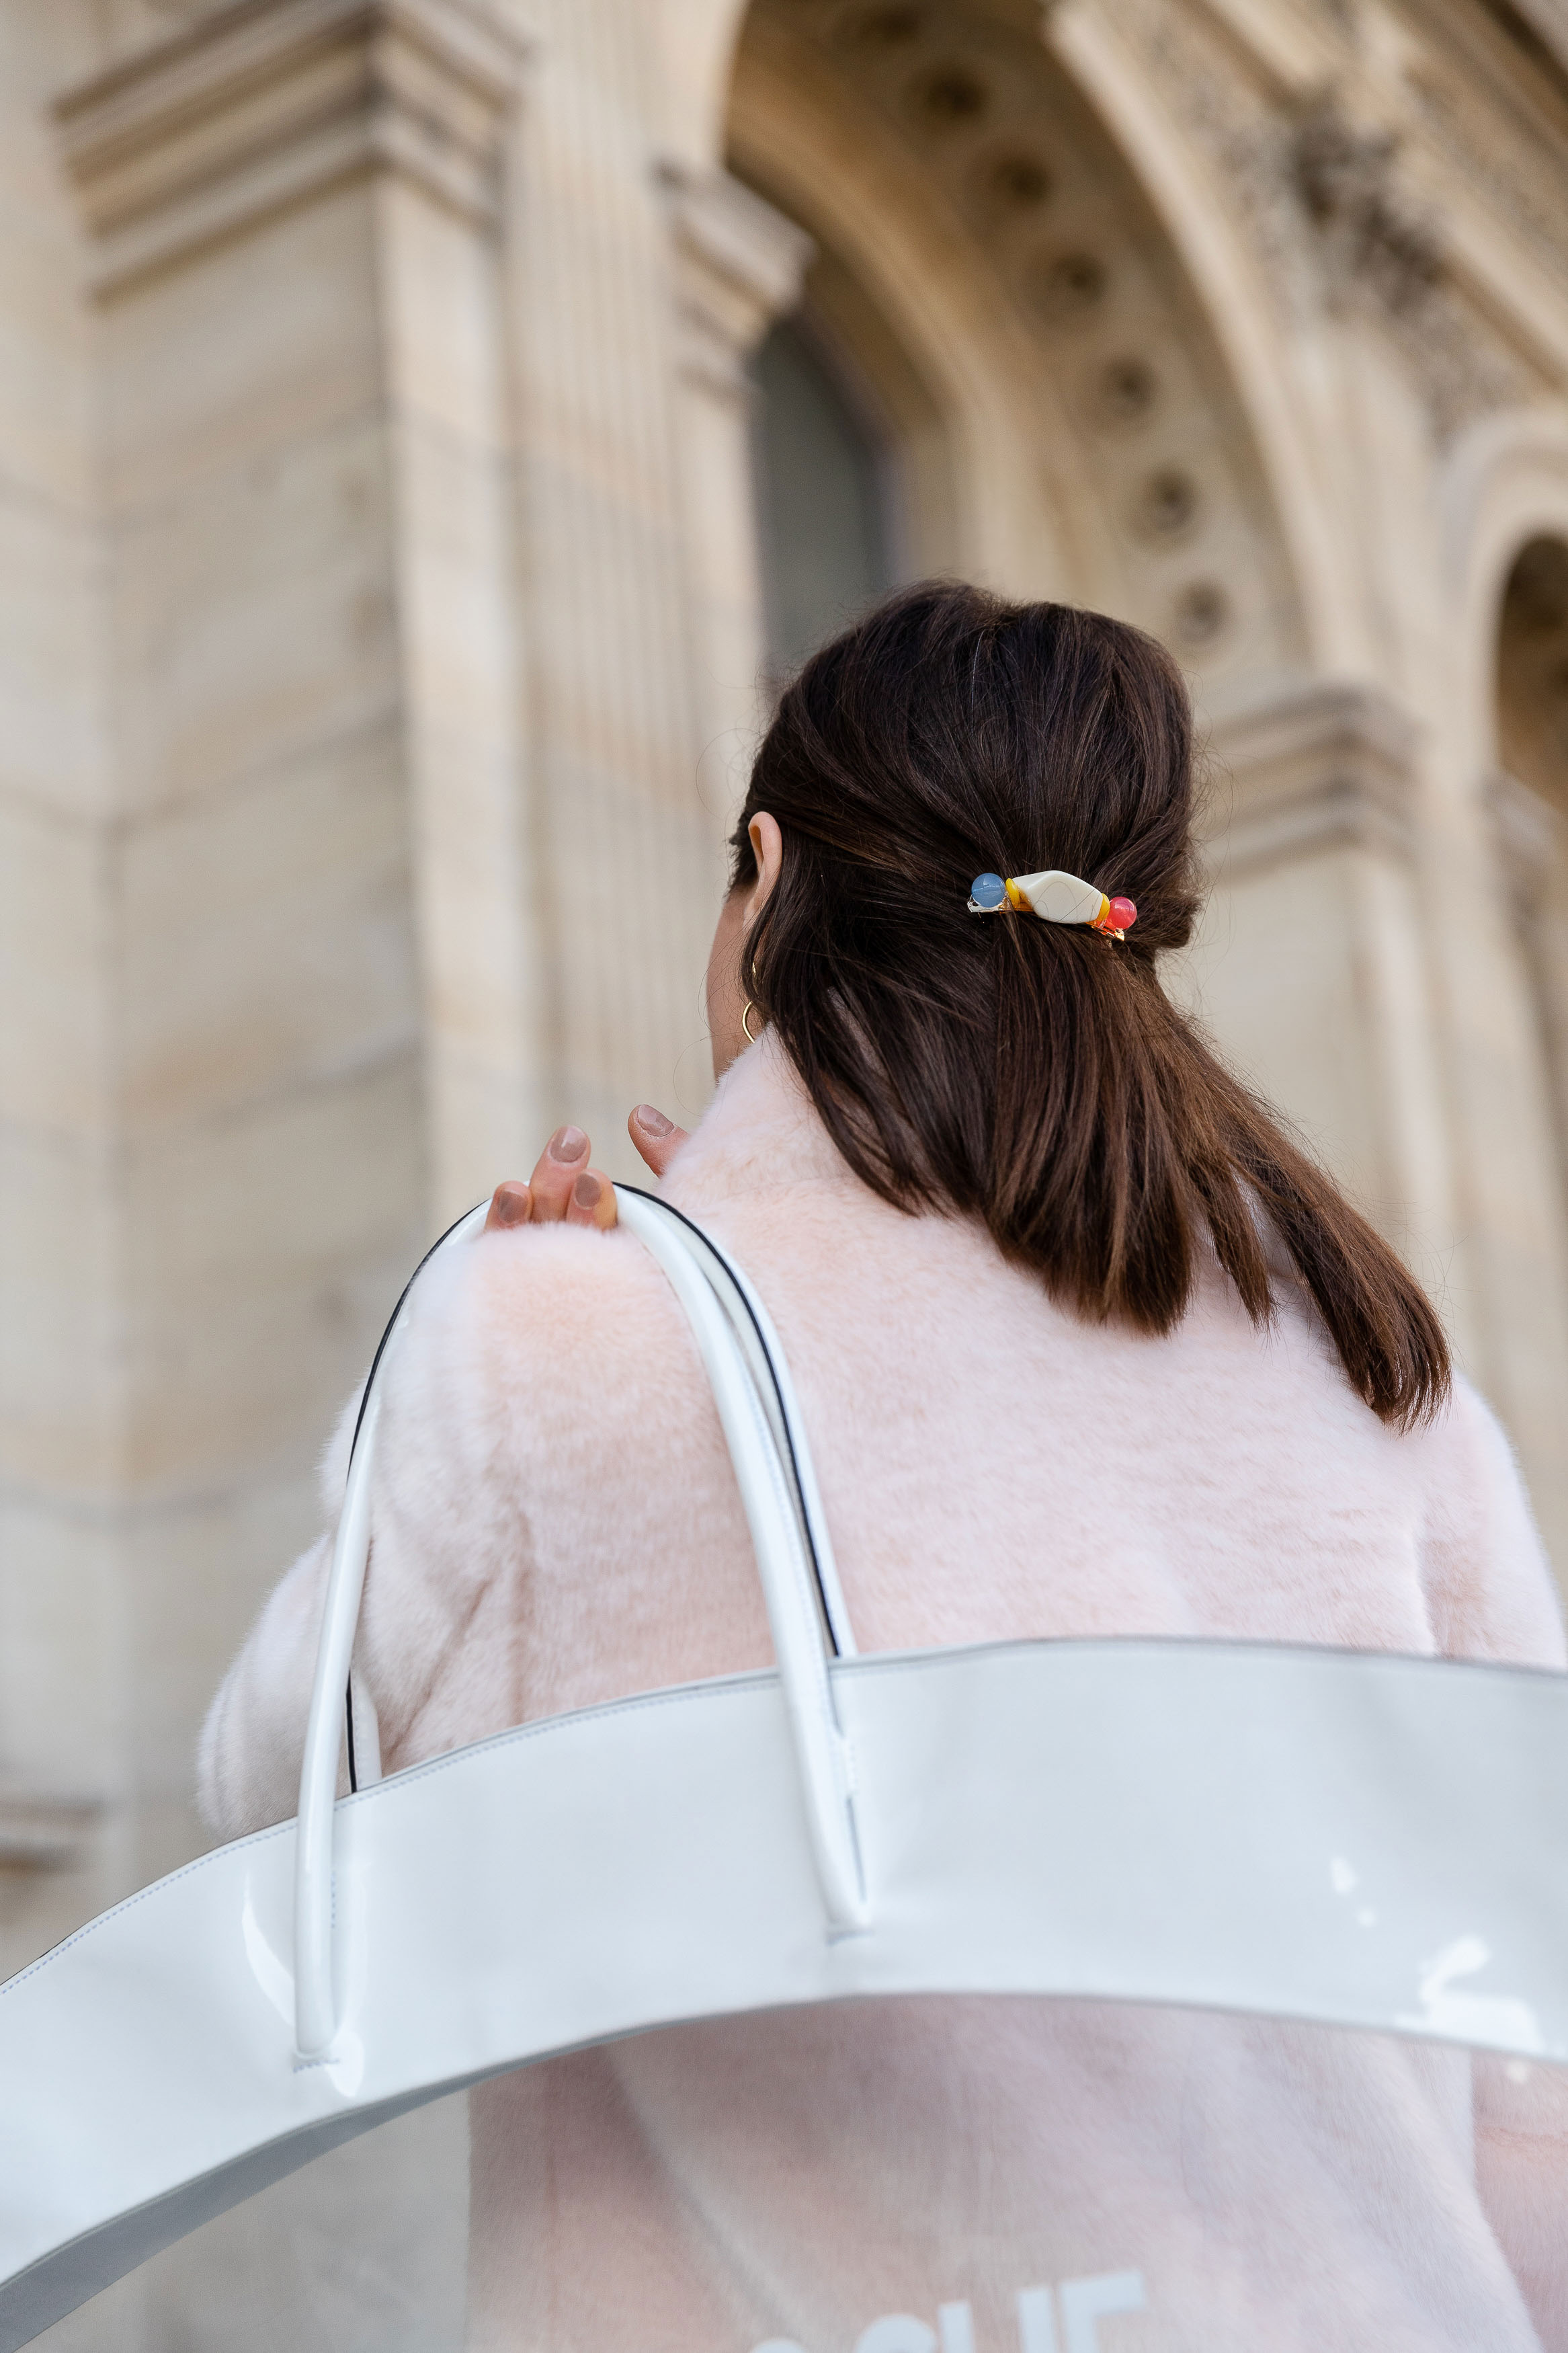 Guy Laroche Best Street Style Paris Fashion Week Mars 2019 Julia Comil / French Fashion Blogger in Los Angeles Outfit for PFW Fall Winter 2019 show - faux fur pink pastel coat La Seine et Moi, hairclip Valet Studio, bag Guy Laroche, Pants: Max & Moi, shoes Yuul Yie